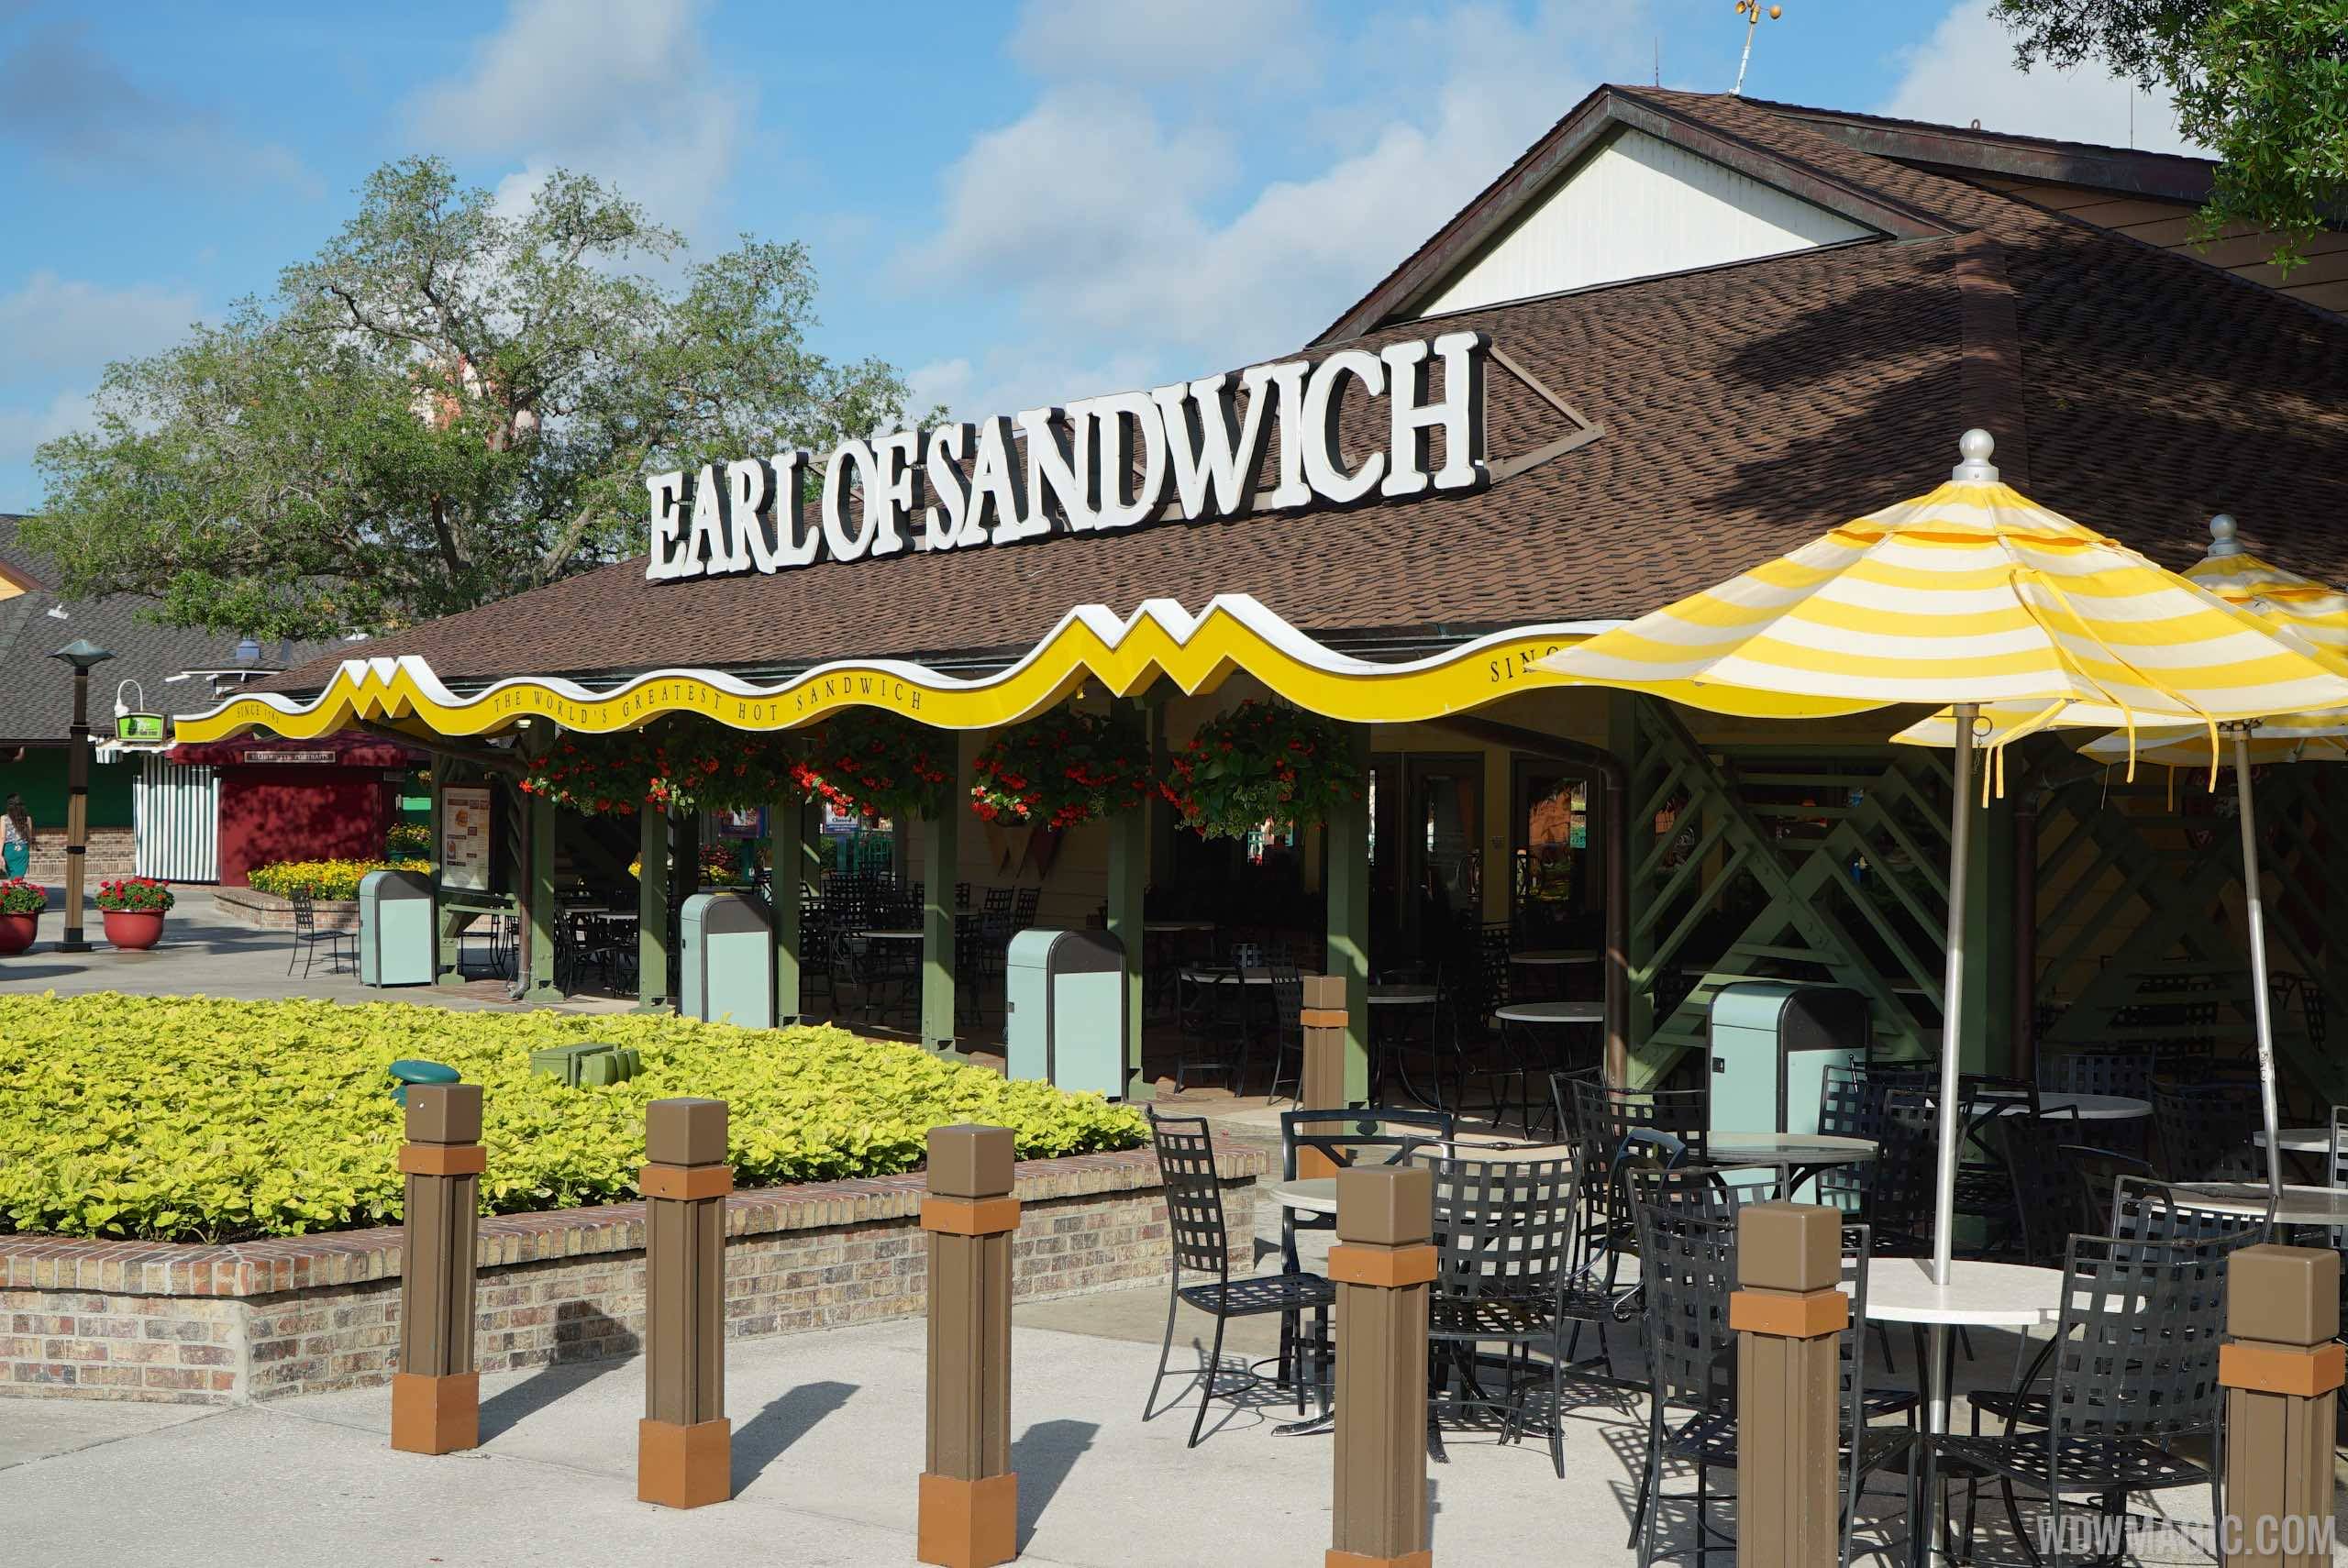 PHOTOS - Limited-time holiday offerings at Earl of Sandwich Disney Springs